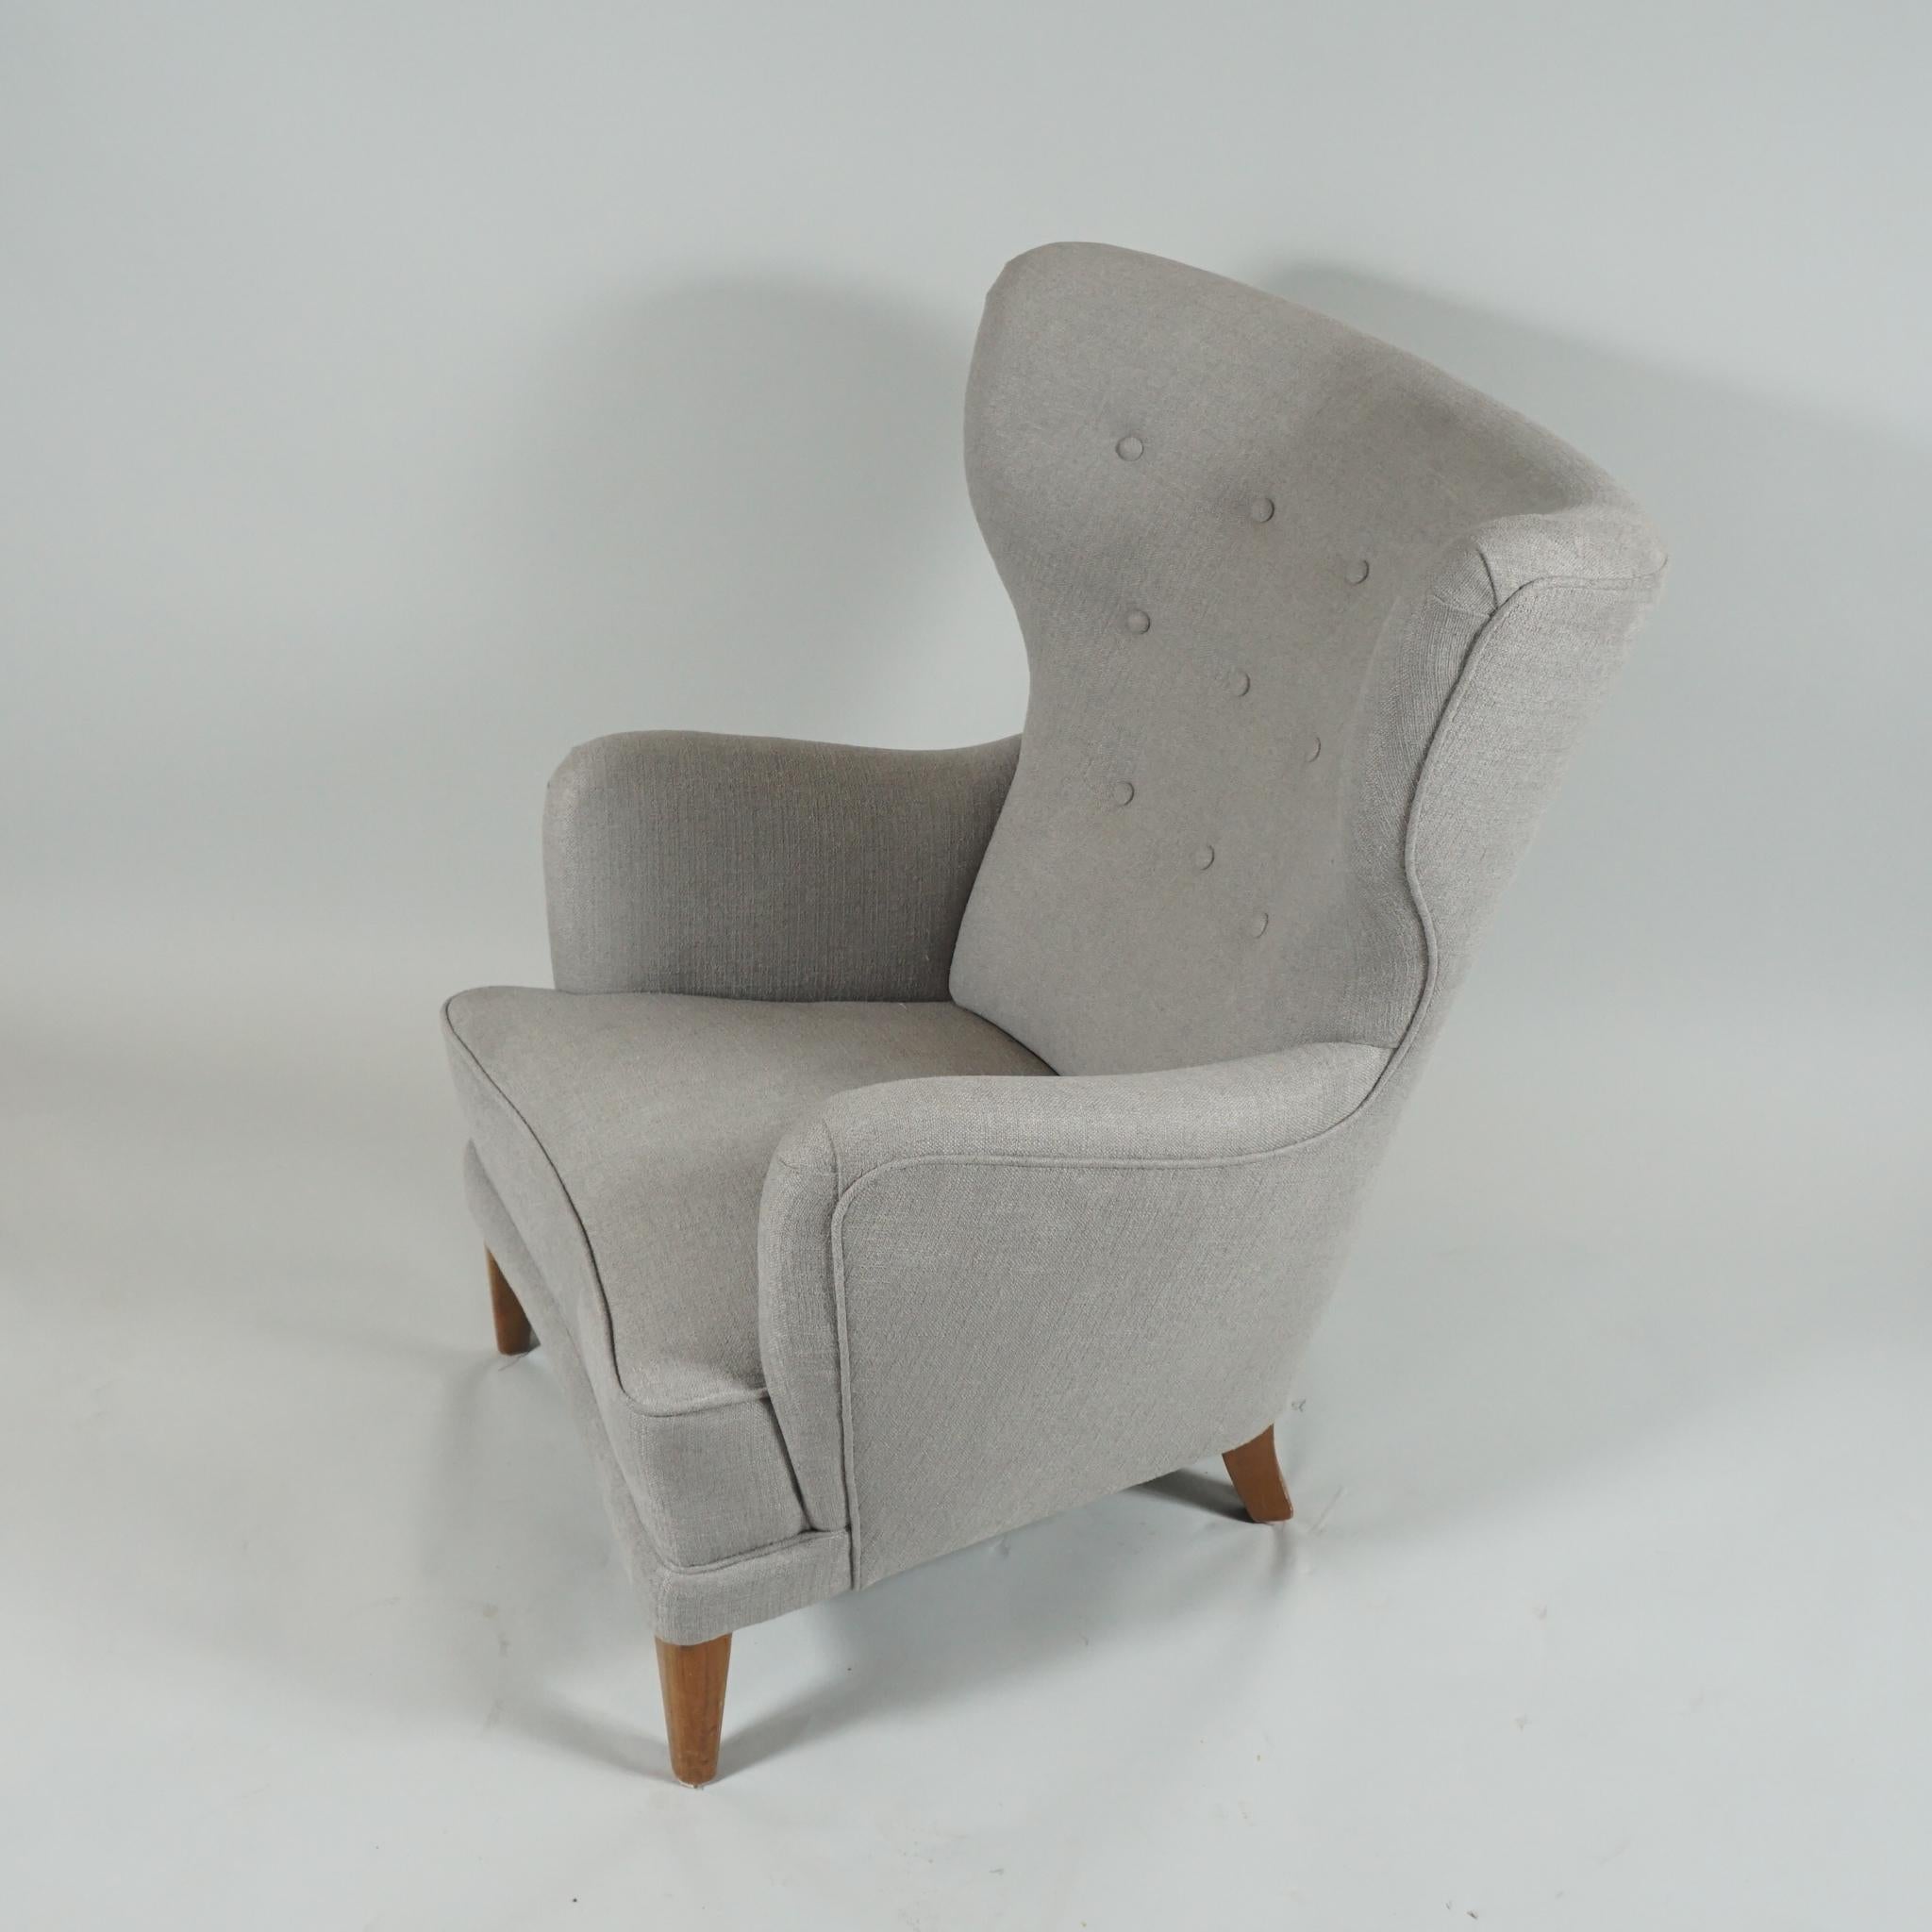 Handsome Danish modern lounge chair with high winged-back and generous curved arms, 
newly reupholstered in a soft grey wool fabric, legs in beech.